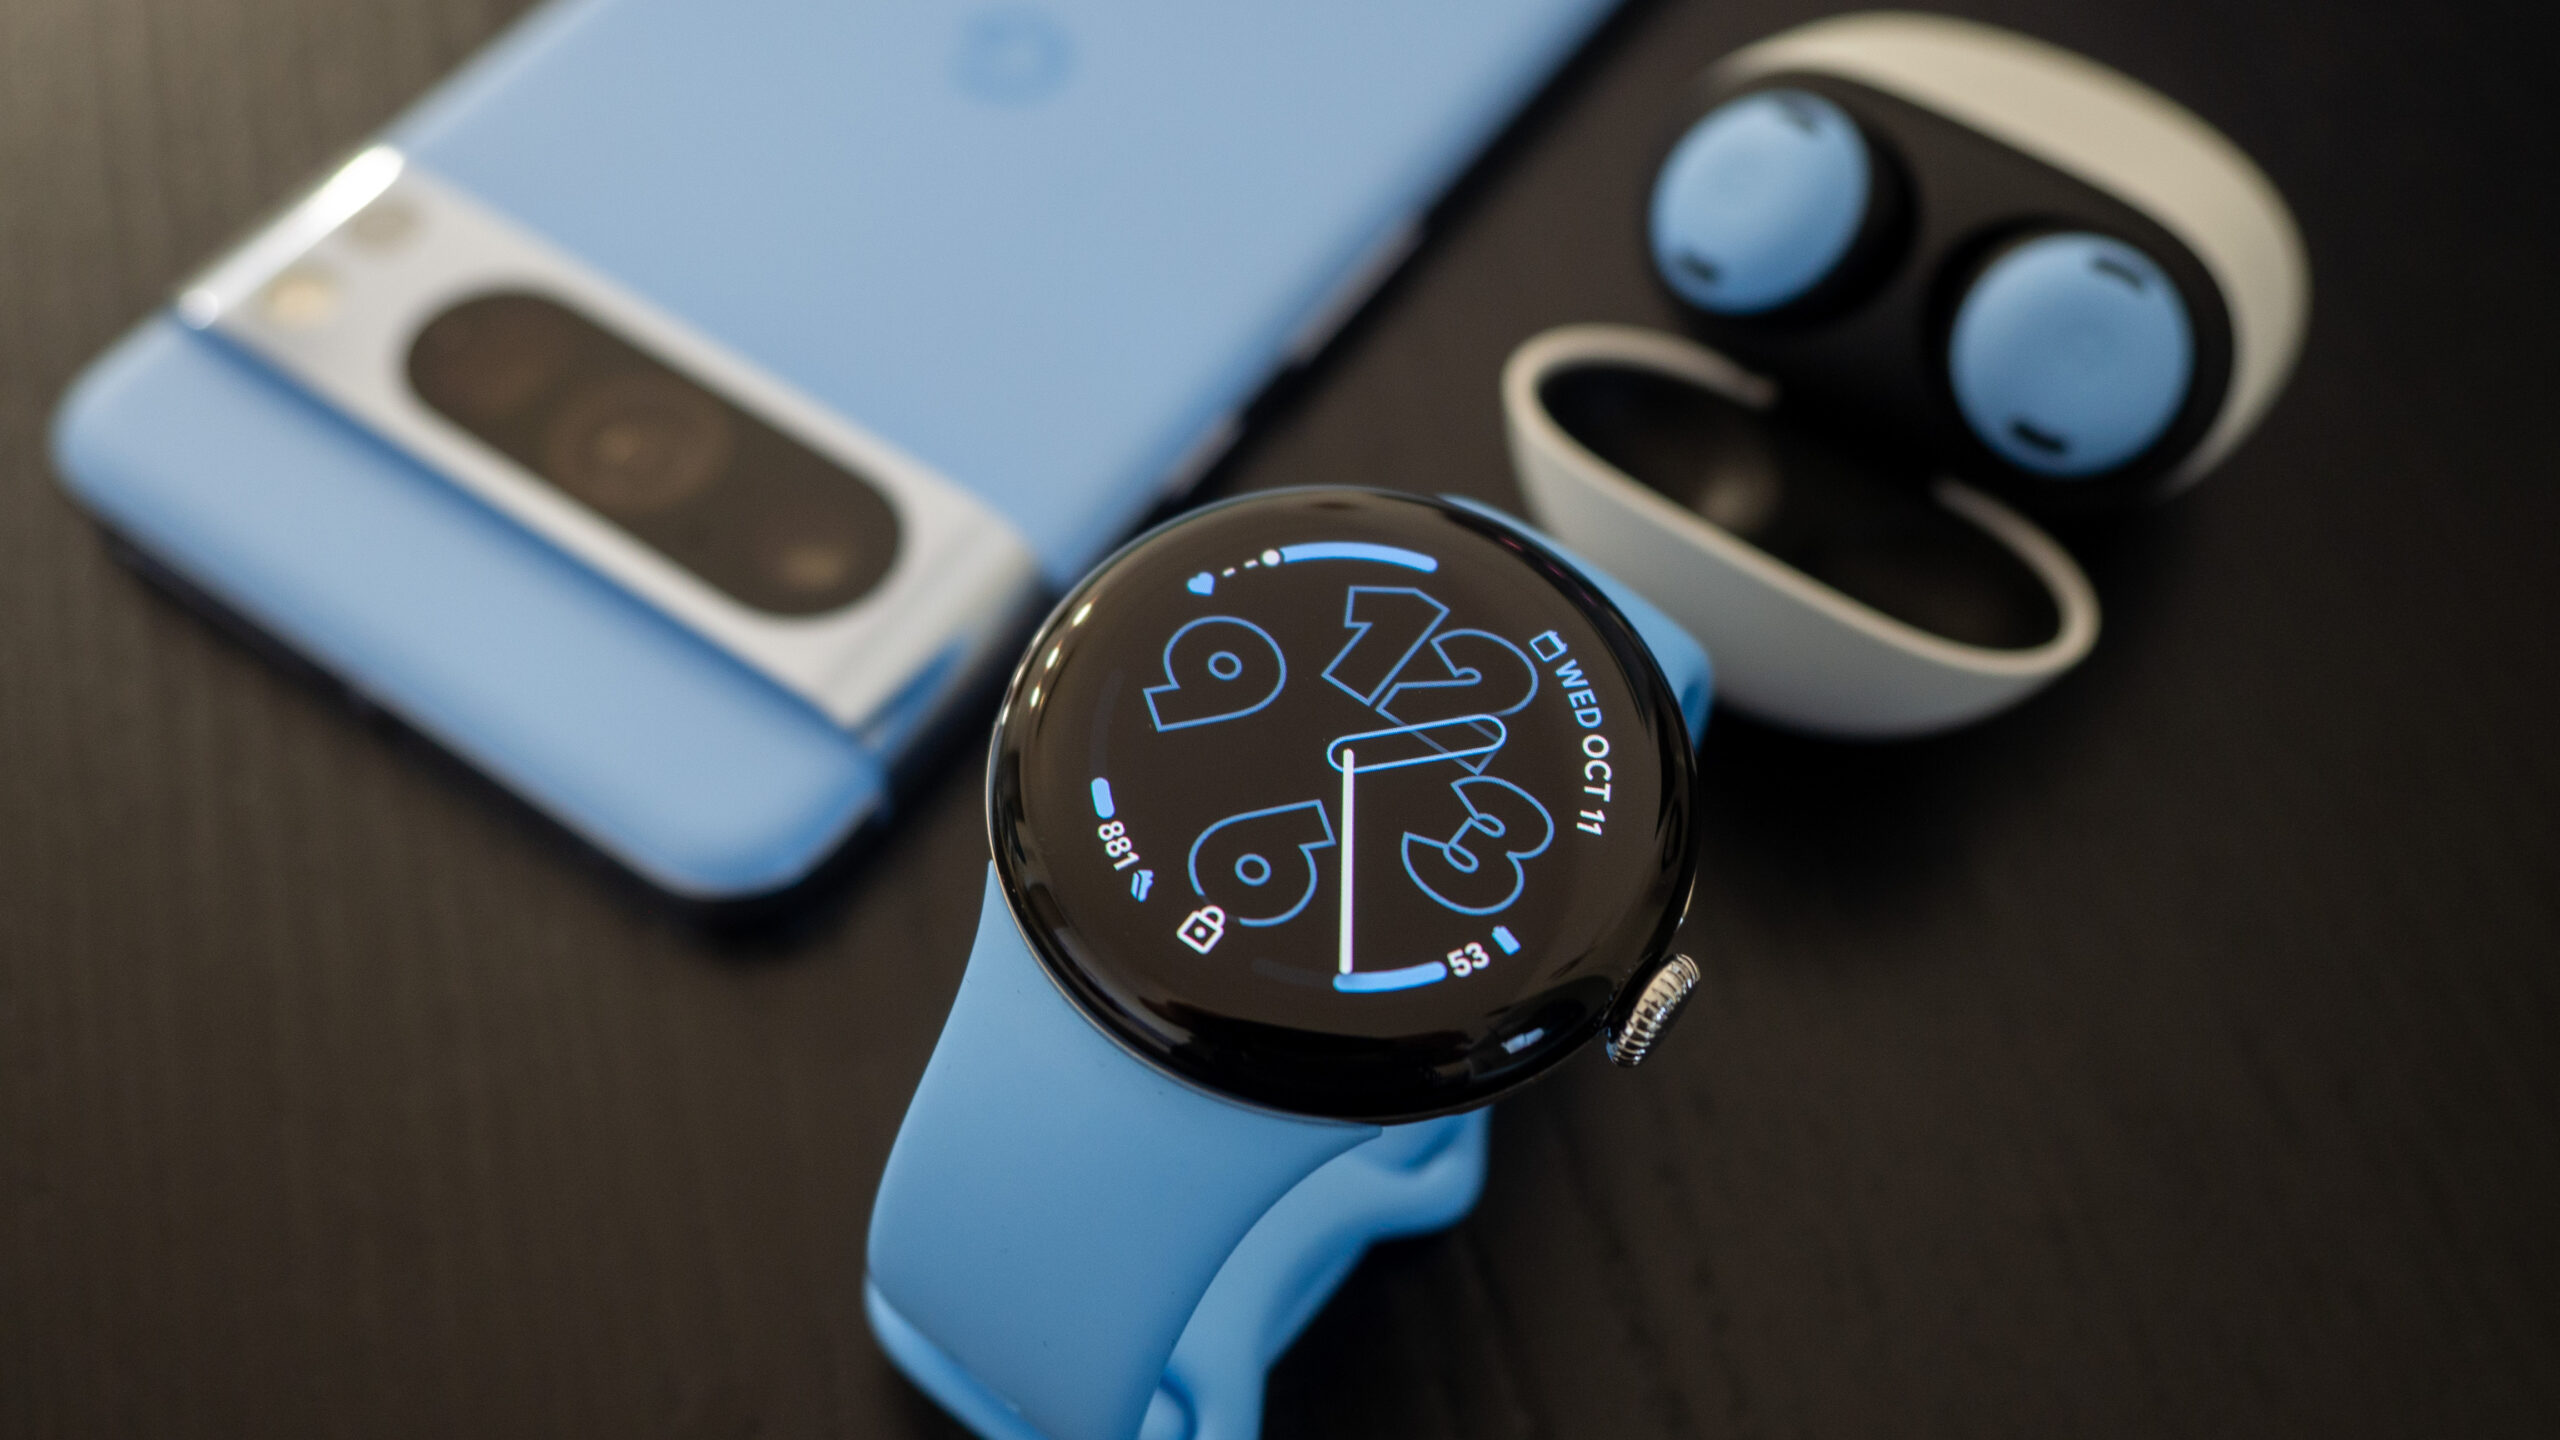 You’ll soon be able to sync app permissions between your phone and Wear OS watch